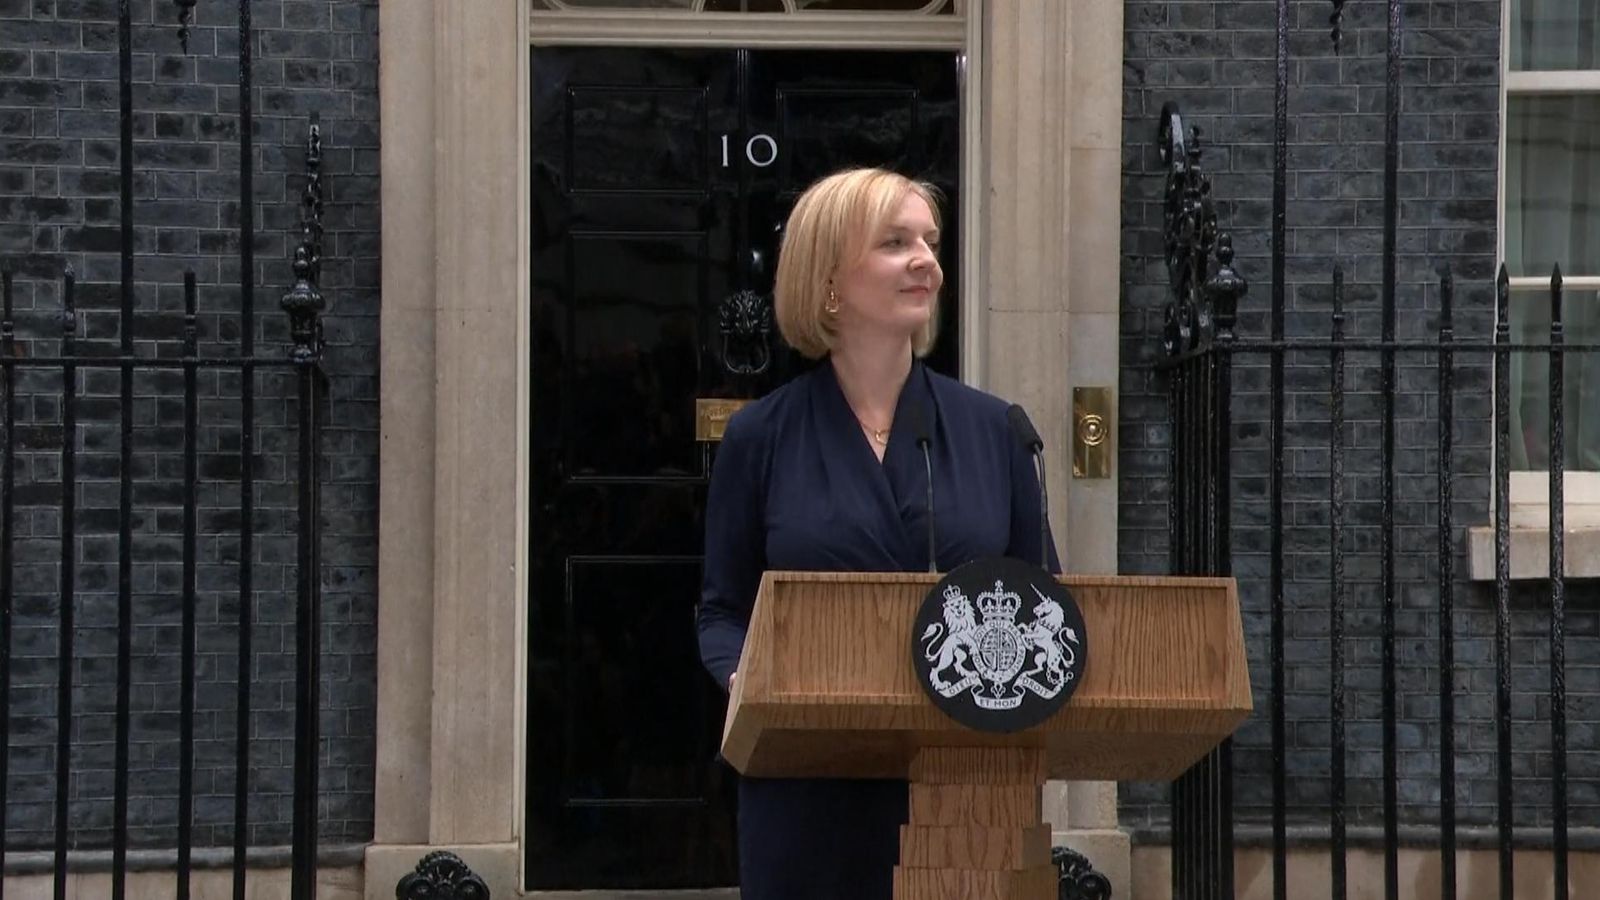 The economy, the energy crisis and the NHS – Liz Truss sets out three key priorities in her first speech as PM |  PoliticsNews